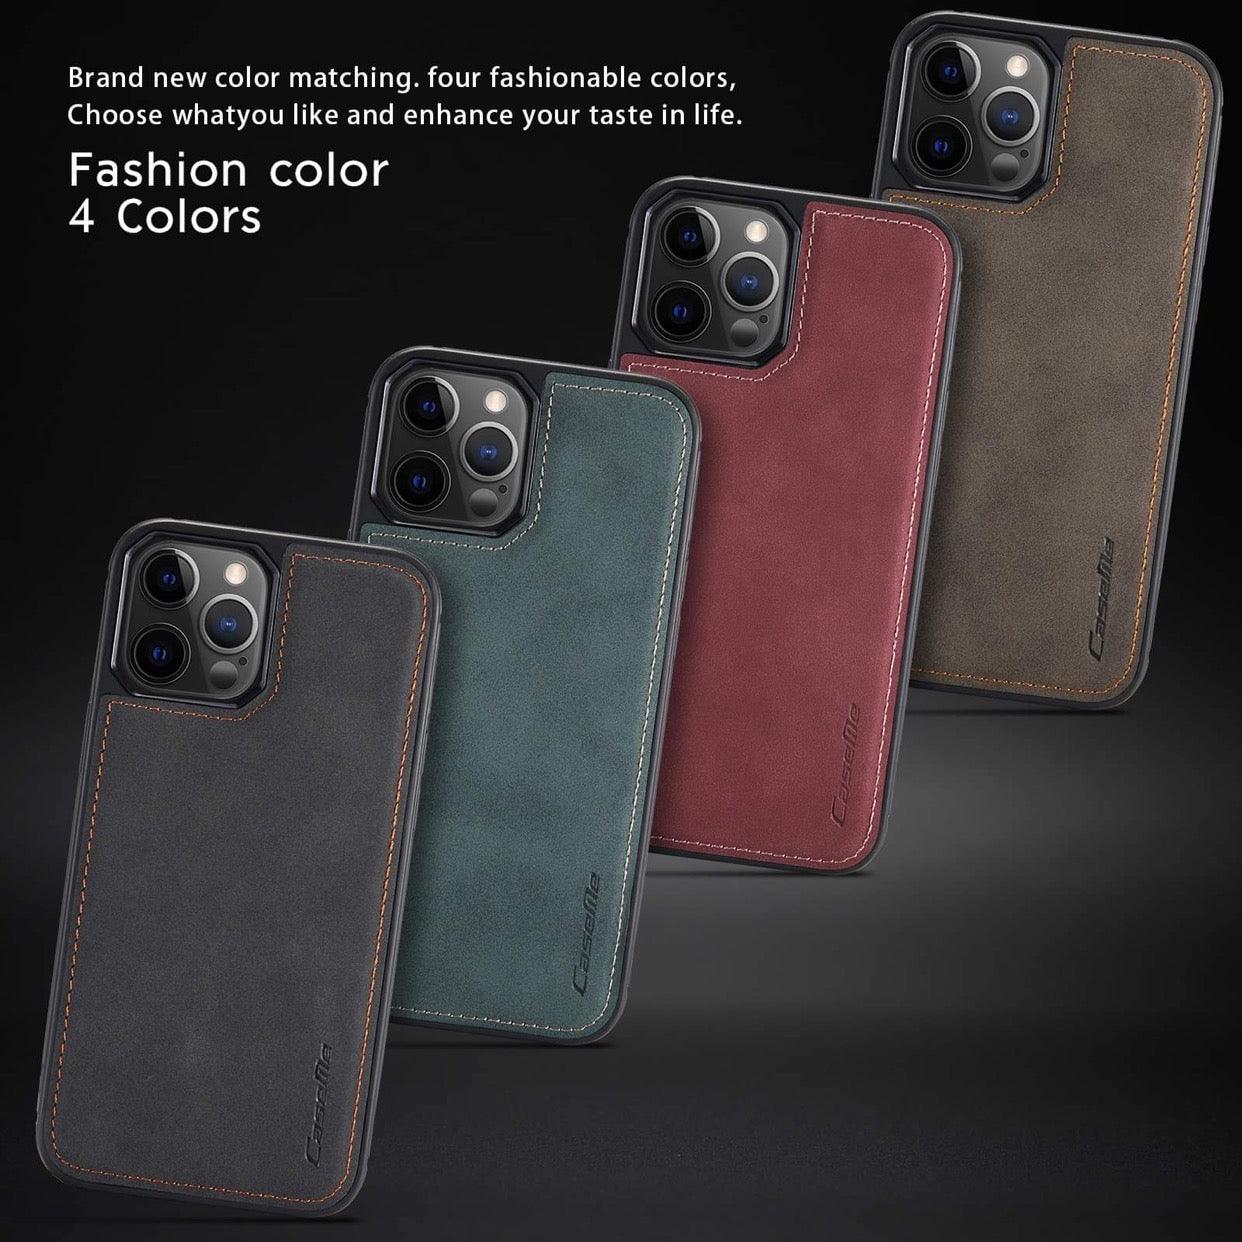 Iphone  Premium Leather  Cover Hard Caseme phone  Case B-SPIN COMPANY